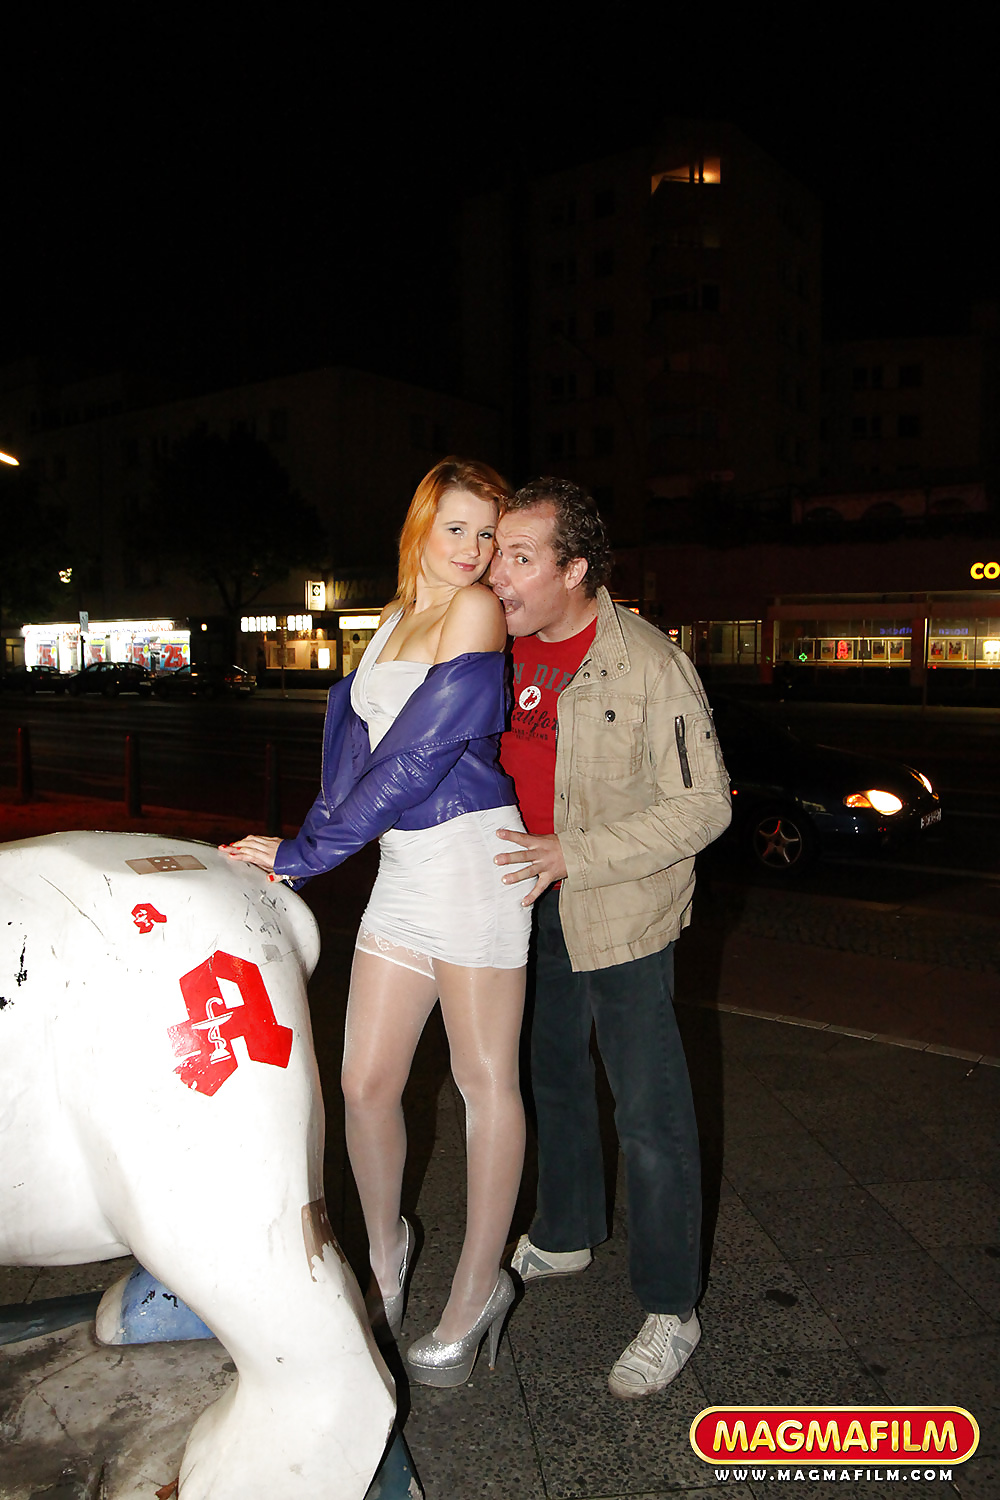 Magmafilm Redhead gets fucked on the street in public #107214671